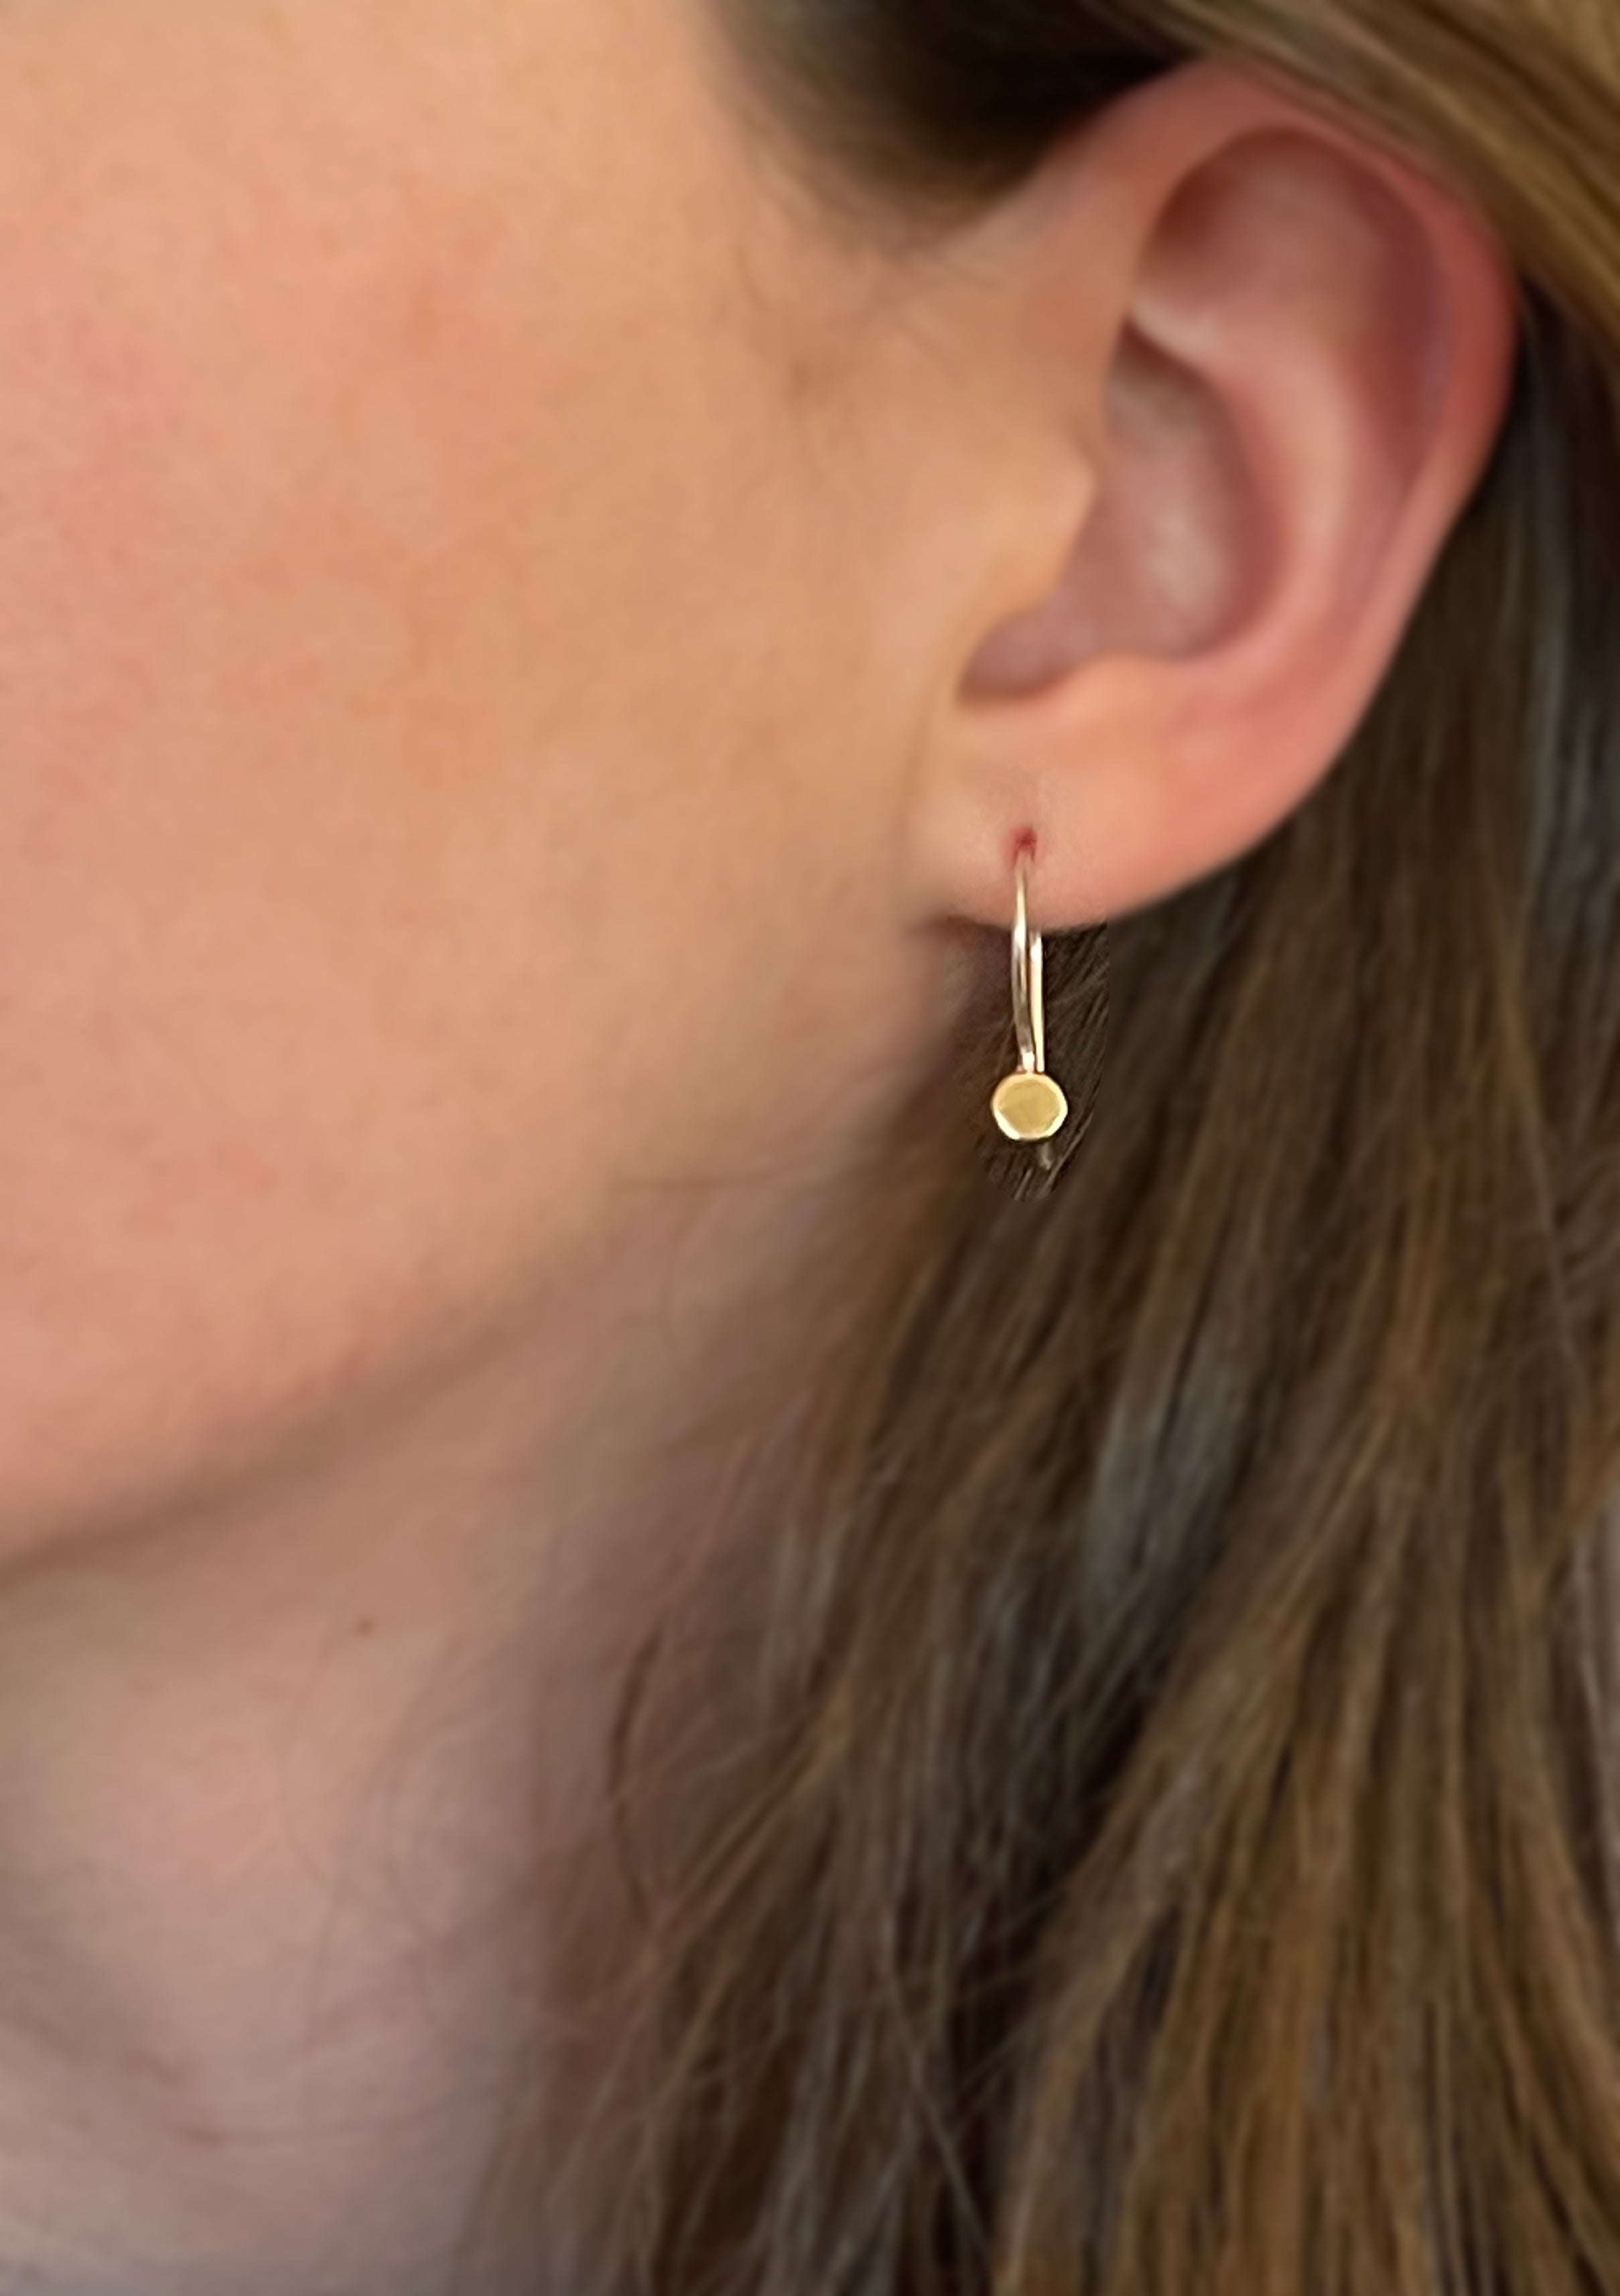 Solid Gold Circle Disc Earrings, Small Simple Gold Earrings, 14k Gold Earrings, Minimalist